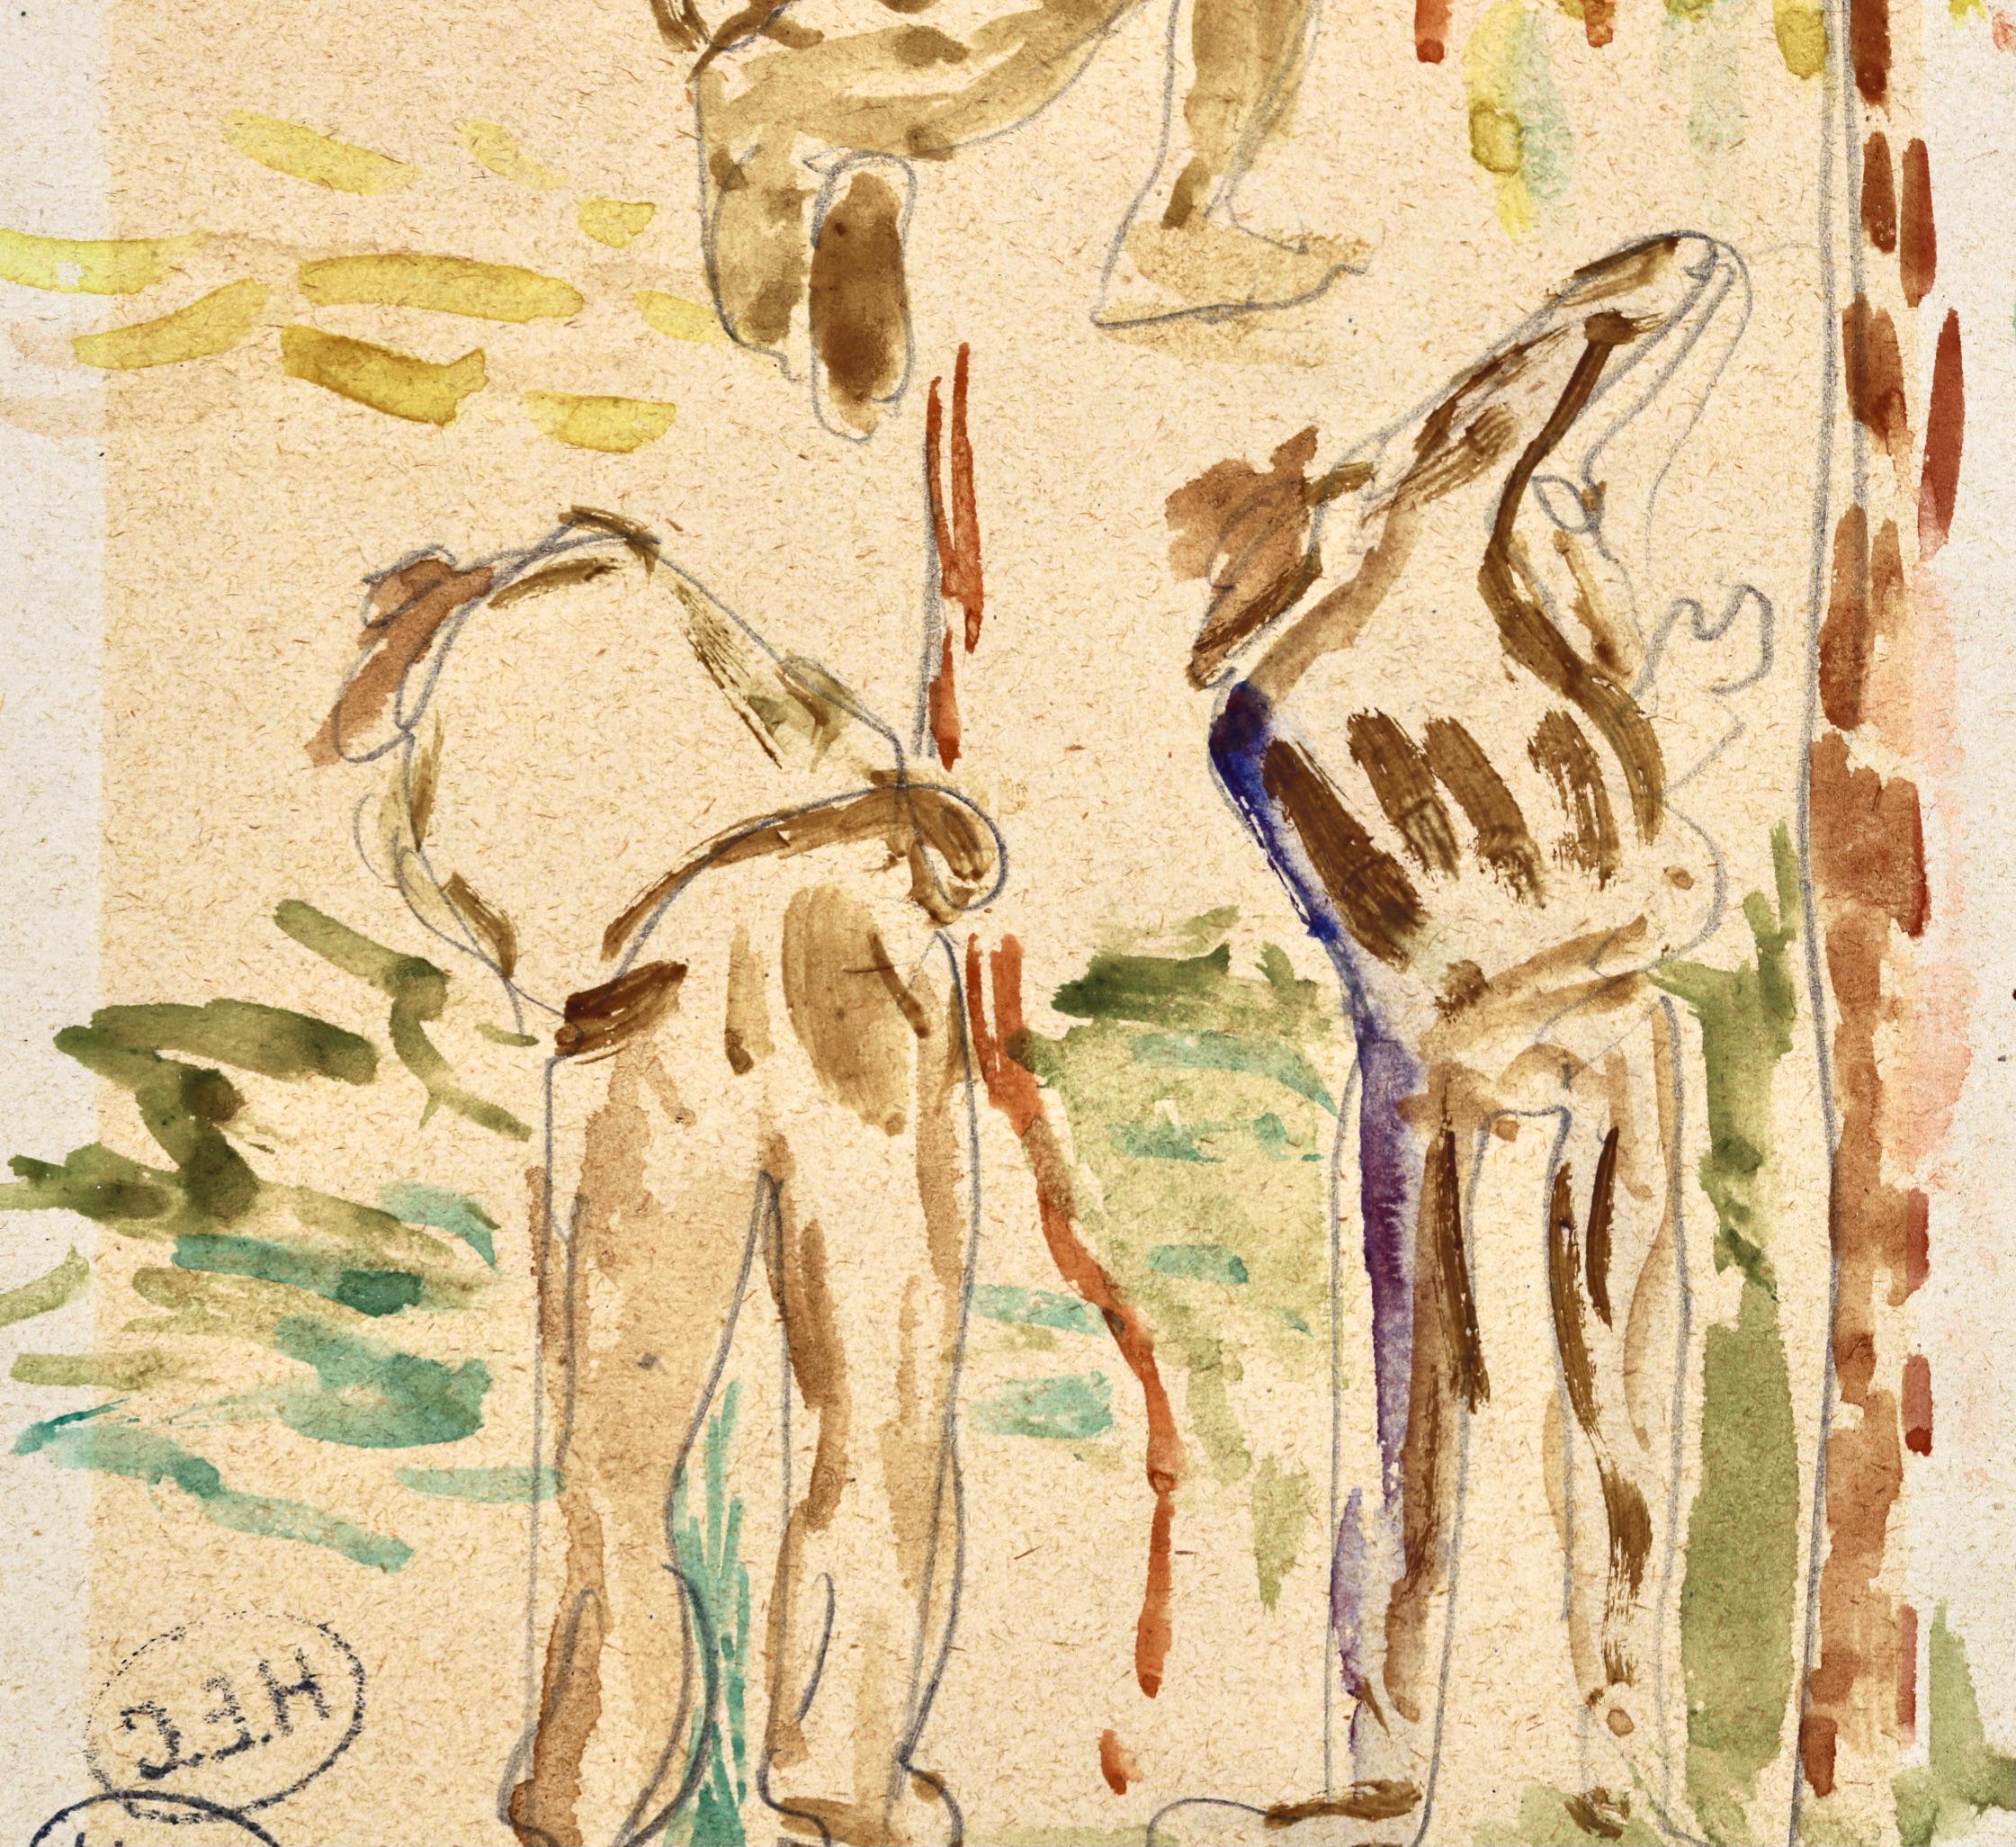 Impressionist watercolour on paper circa 1890 by French Neo-Impressionist painter Henri Edmond Cross. The work is a rear view study of three workers in standing and kneeling positions. 

Signature:
Stamped twice with the cachet of the painter lower